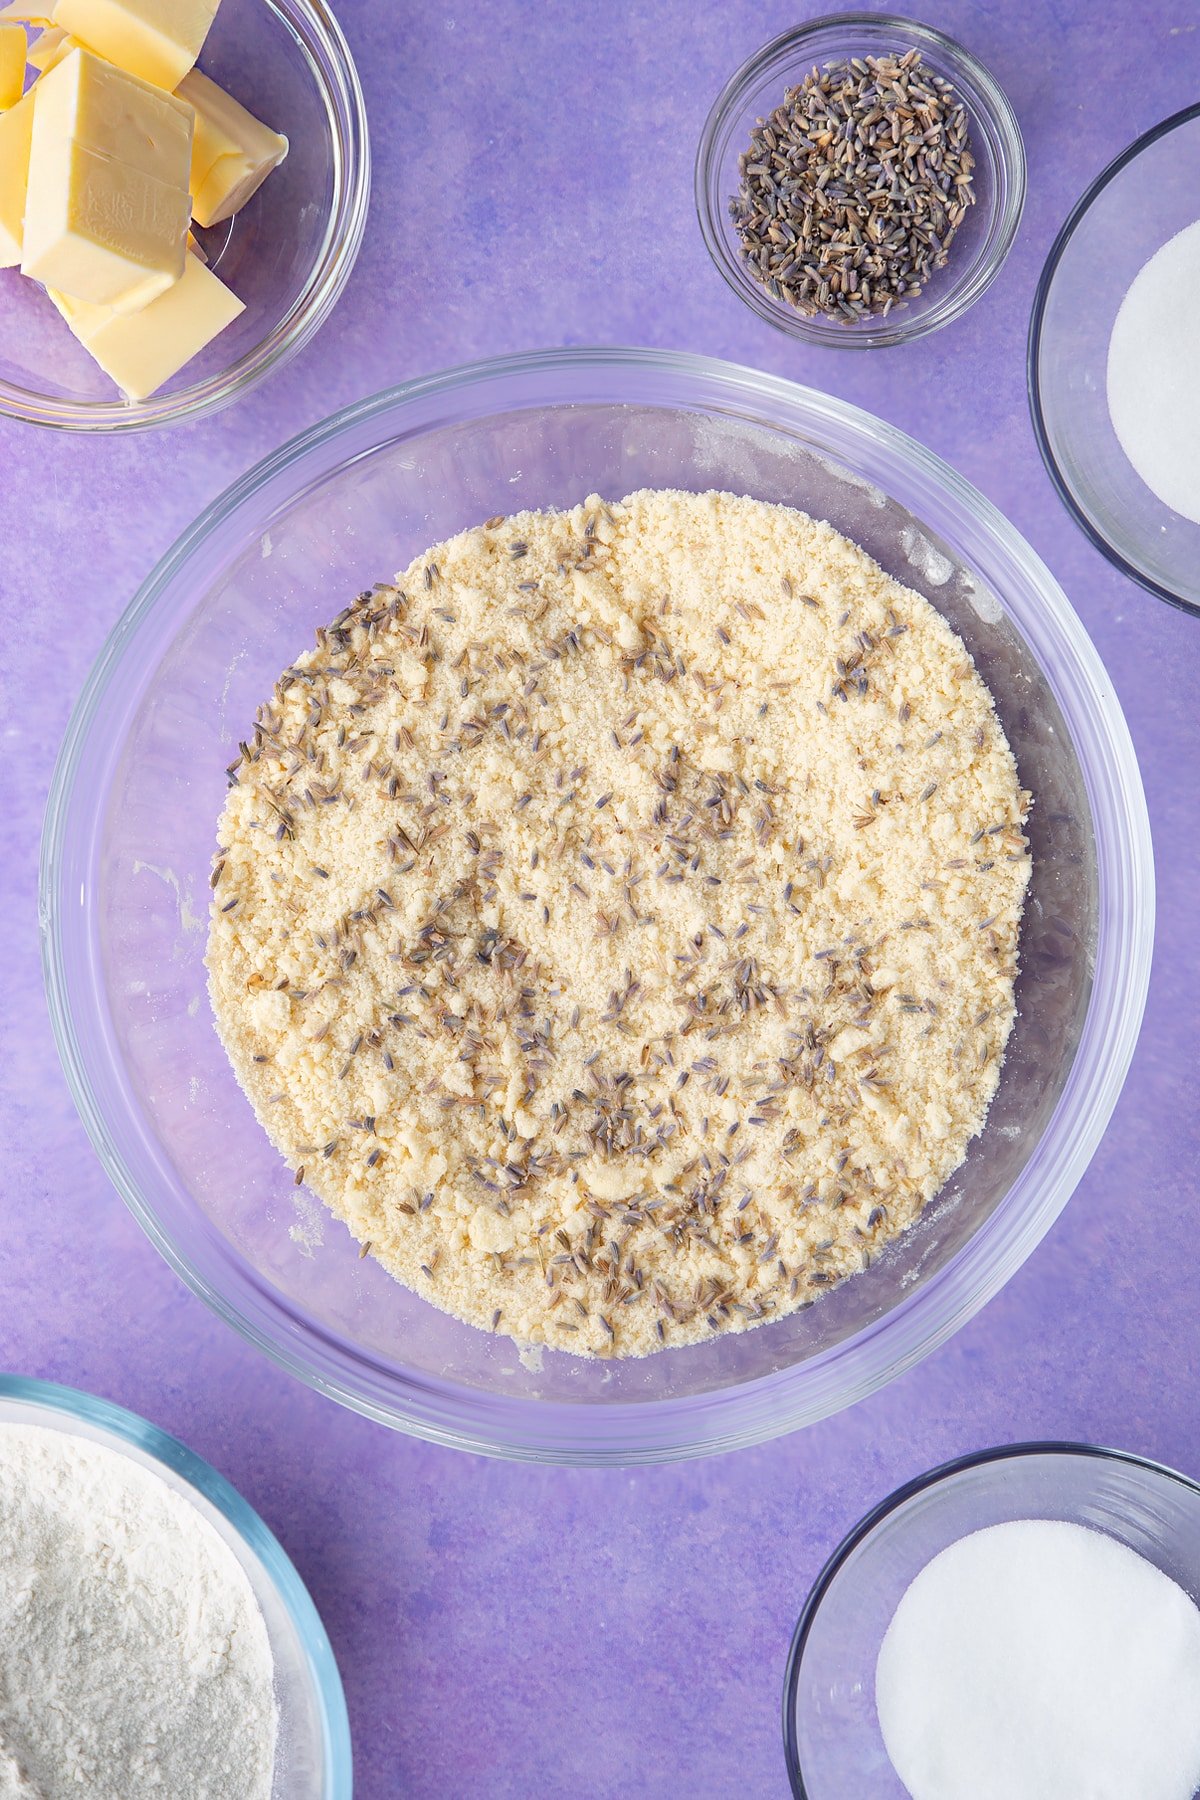 Flour, sugar, butter mixed to a crumb in a bowl with lavender on top. Ingredients to make lavender shortbread cookies.